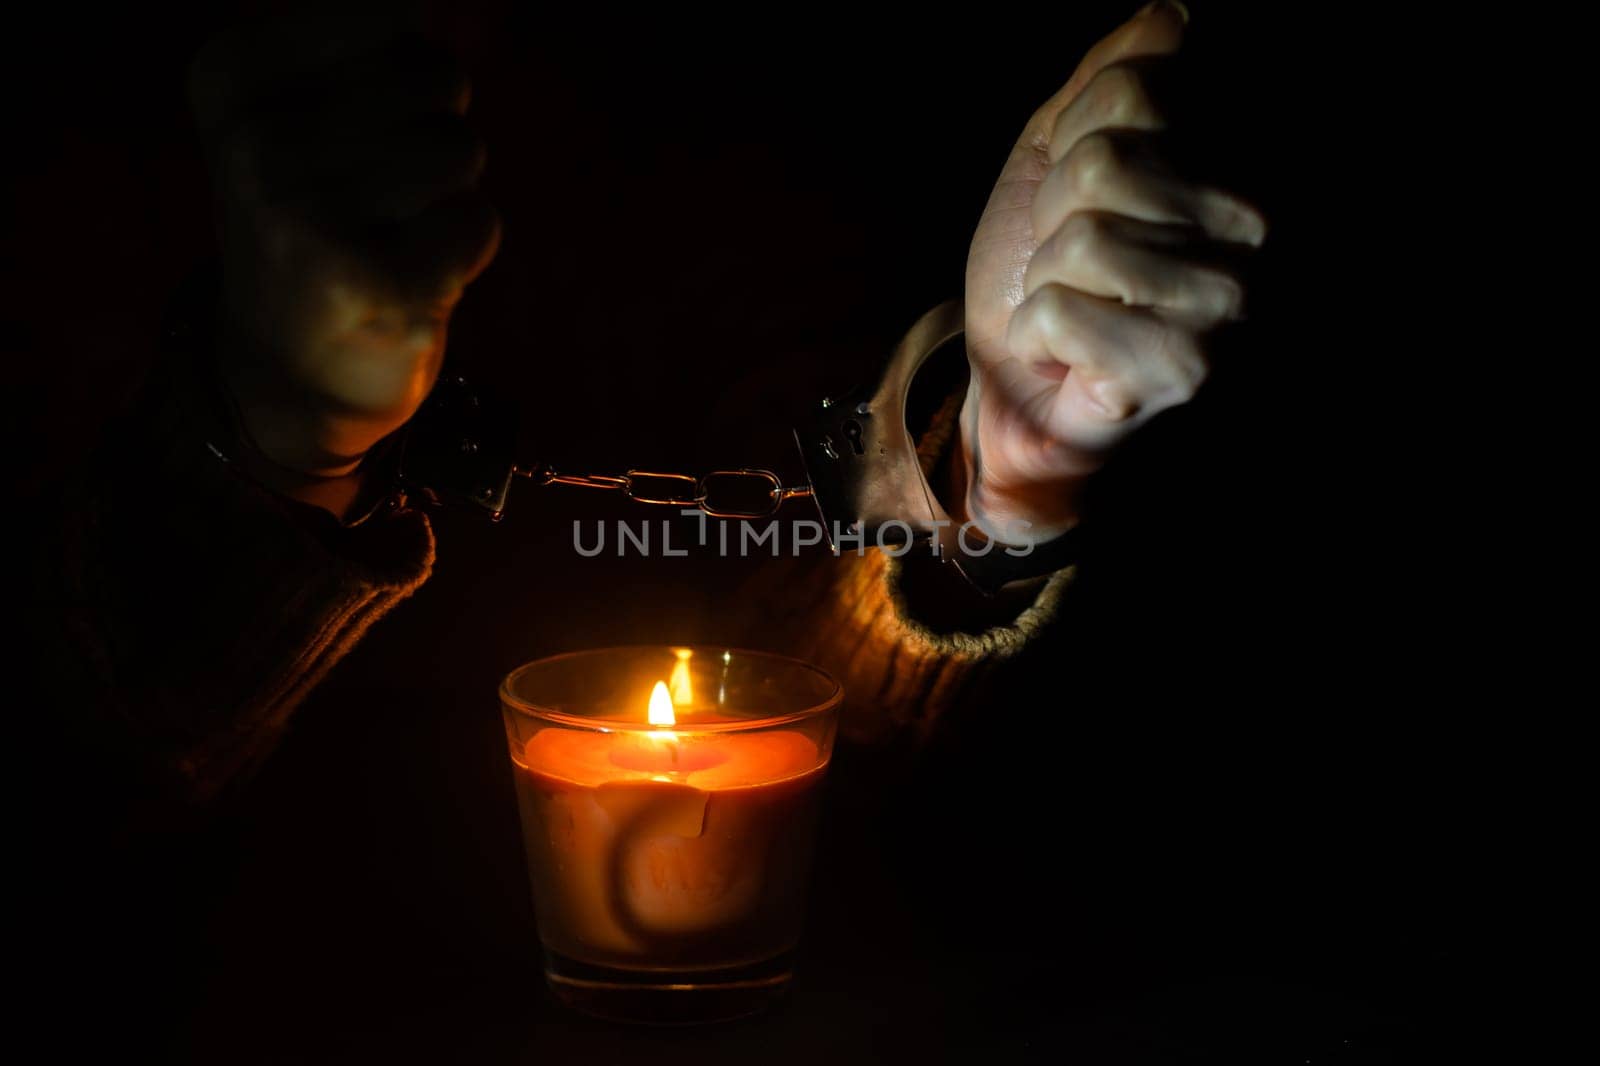 composition with the toy handcuffs, candle. by Andelov13